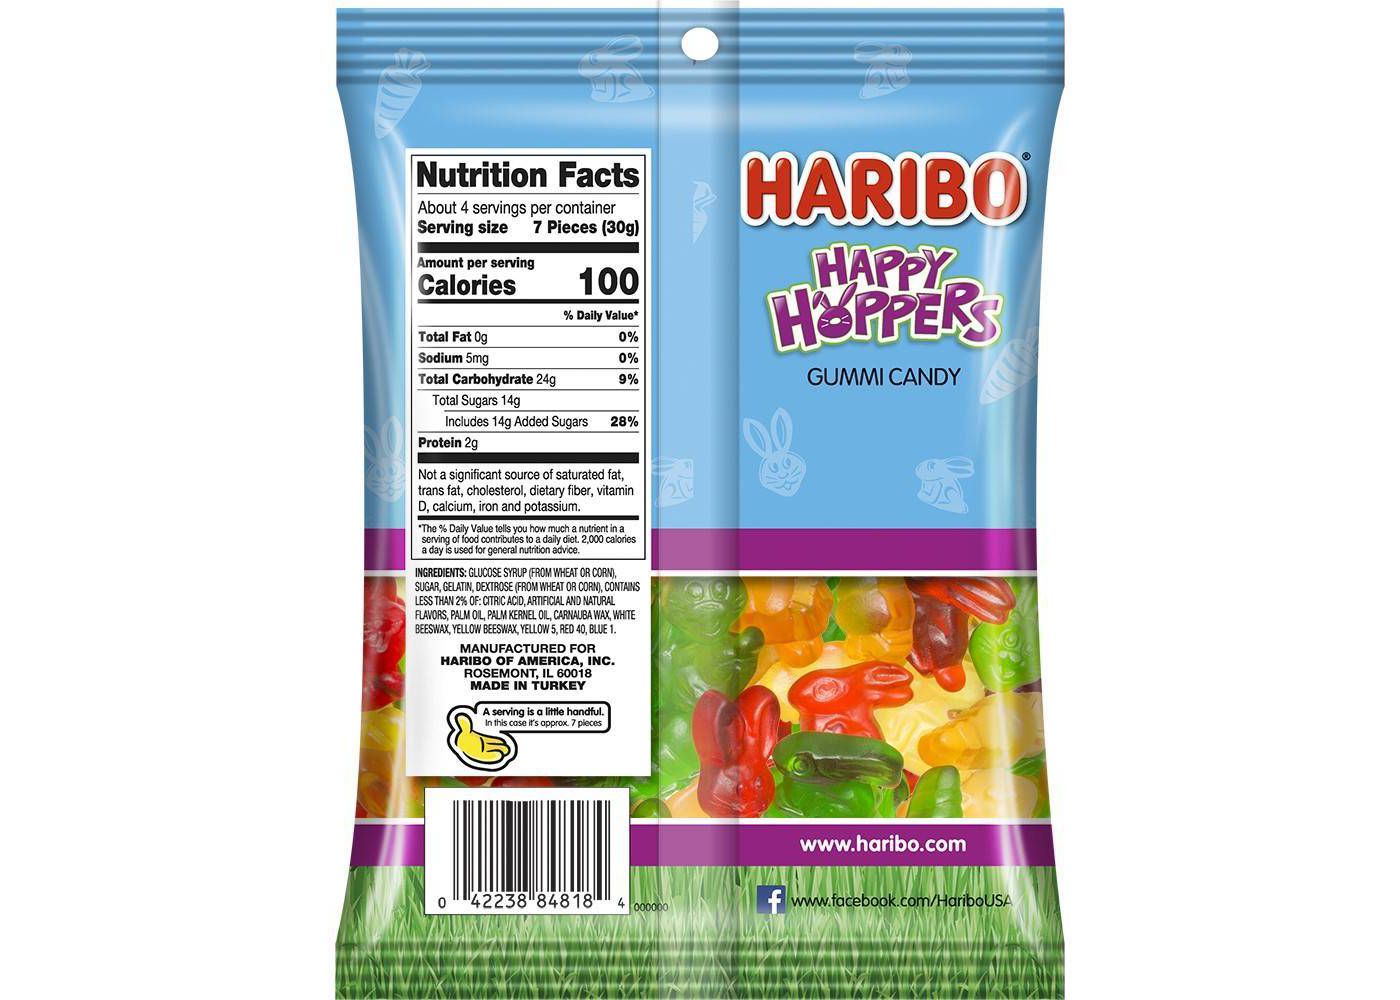 Haribo Easter Happy Hoppers Gummy Candy, 4oz